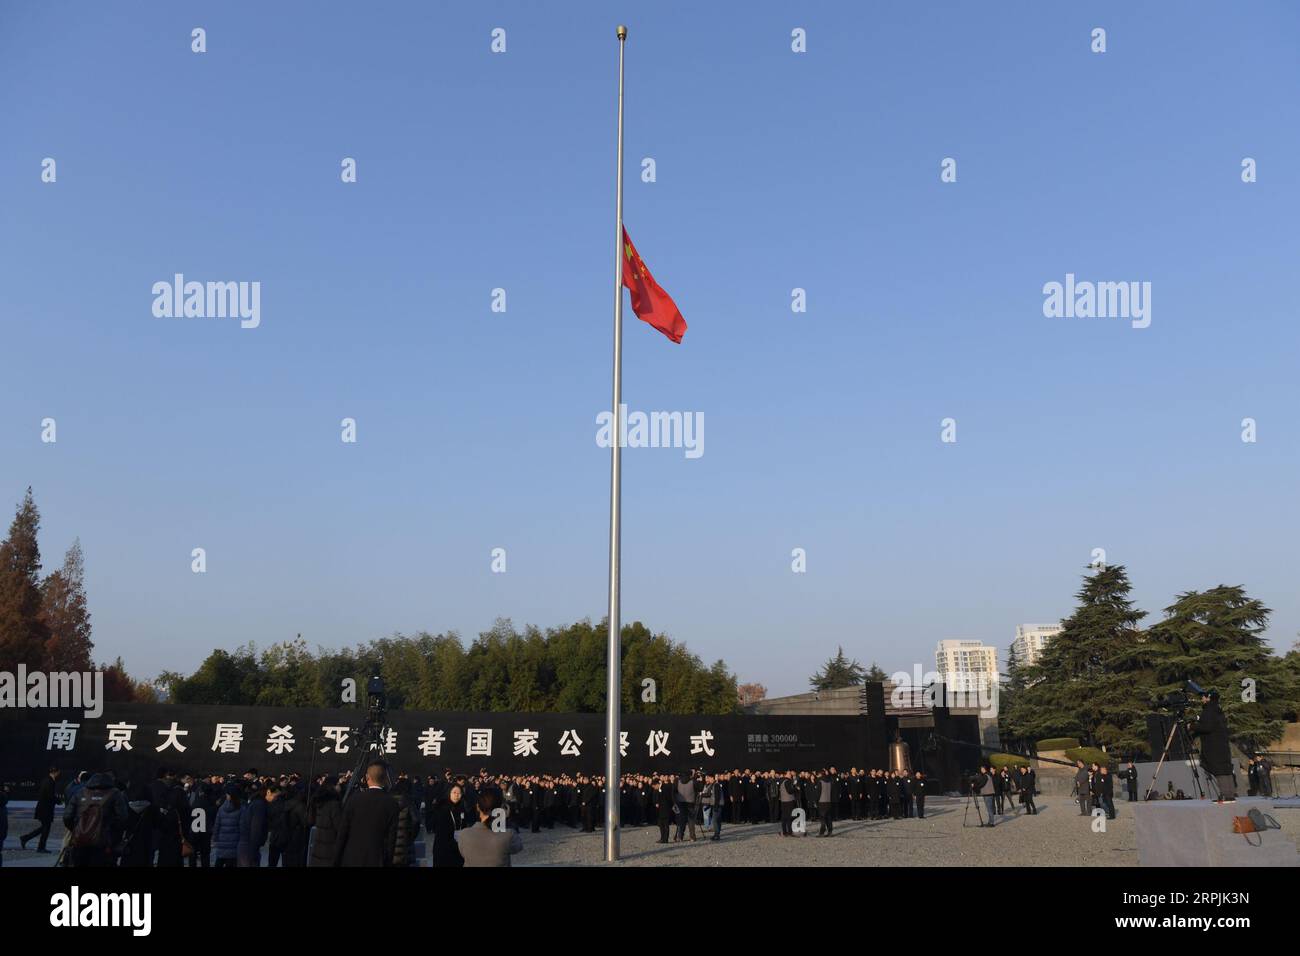 191213 -- NANJING, Dec. 13, 2019 -- China s national flag flies at half-mast during a national memorial ceremony to commemorate the victims of the Nanjing Massacre at the memorial hall for the massacre victims in Nanjing, east China s Jiangsu Province, Dec. 13, 2019.  CHINA-NANJING MASSACRE VICTIMS-NATIONAL MEMORIAL CEREMONY CN LixBo PUBLICATIONxNOTxINxCHN Stock Photo